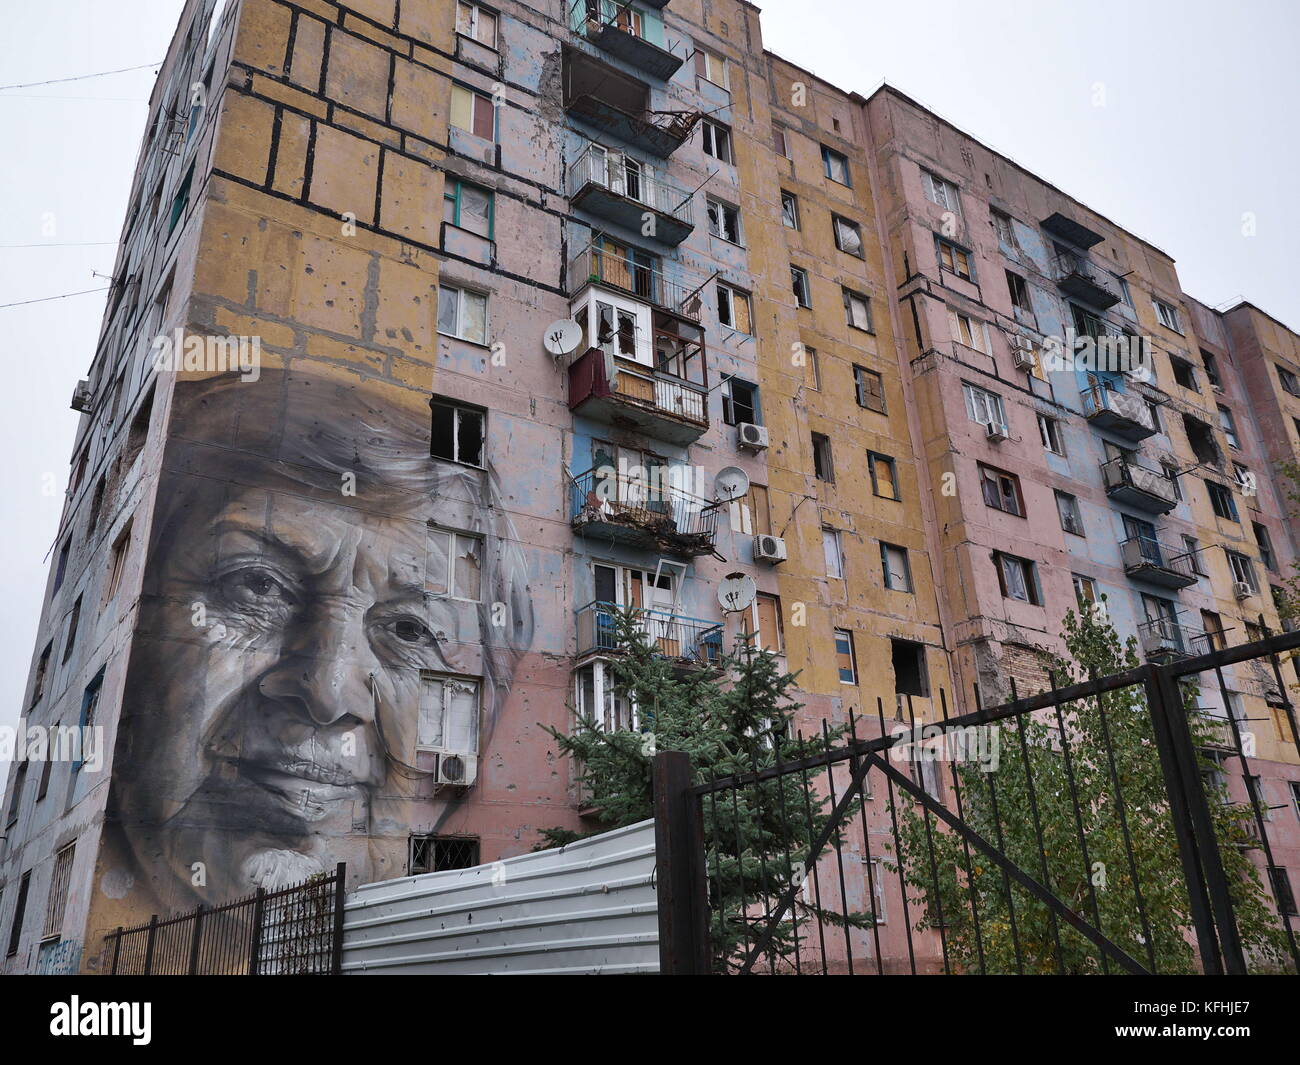 Avdijivka, Ukraine. 14th Oct, 2016. Babushka, a local teacher, is painted on the block of flats in Avdijivka, eastern Ukraine. Buildings here are heavy damaged by shelling. The painting was made by Australian street artist Guido van Helten.The conflict in the Donbass region of eastern Ukraine has been going on for more than 3 years and there is no sign of ending. The conflict was started in early 2014 as the aftermath of the 2014 Ukrainian revolution and the Euro maidan movement where the majority of Ukrainian in western Ukraine wanted to have closer relationship instead of with Russia wi Stock Photo